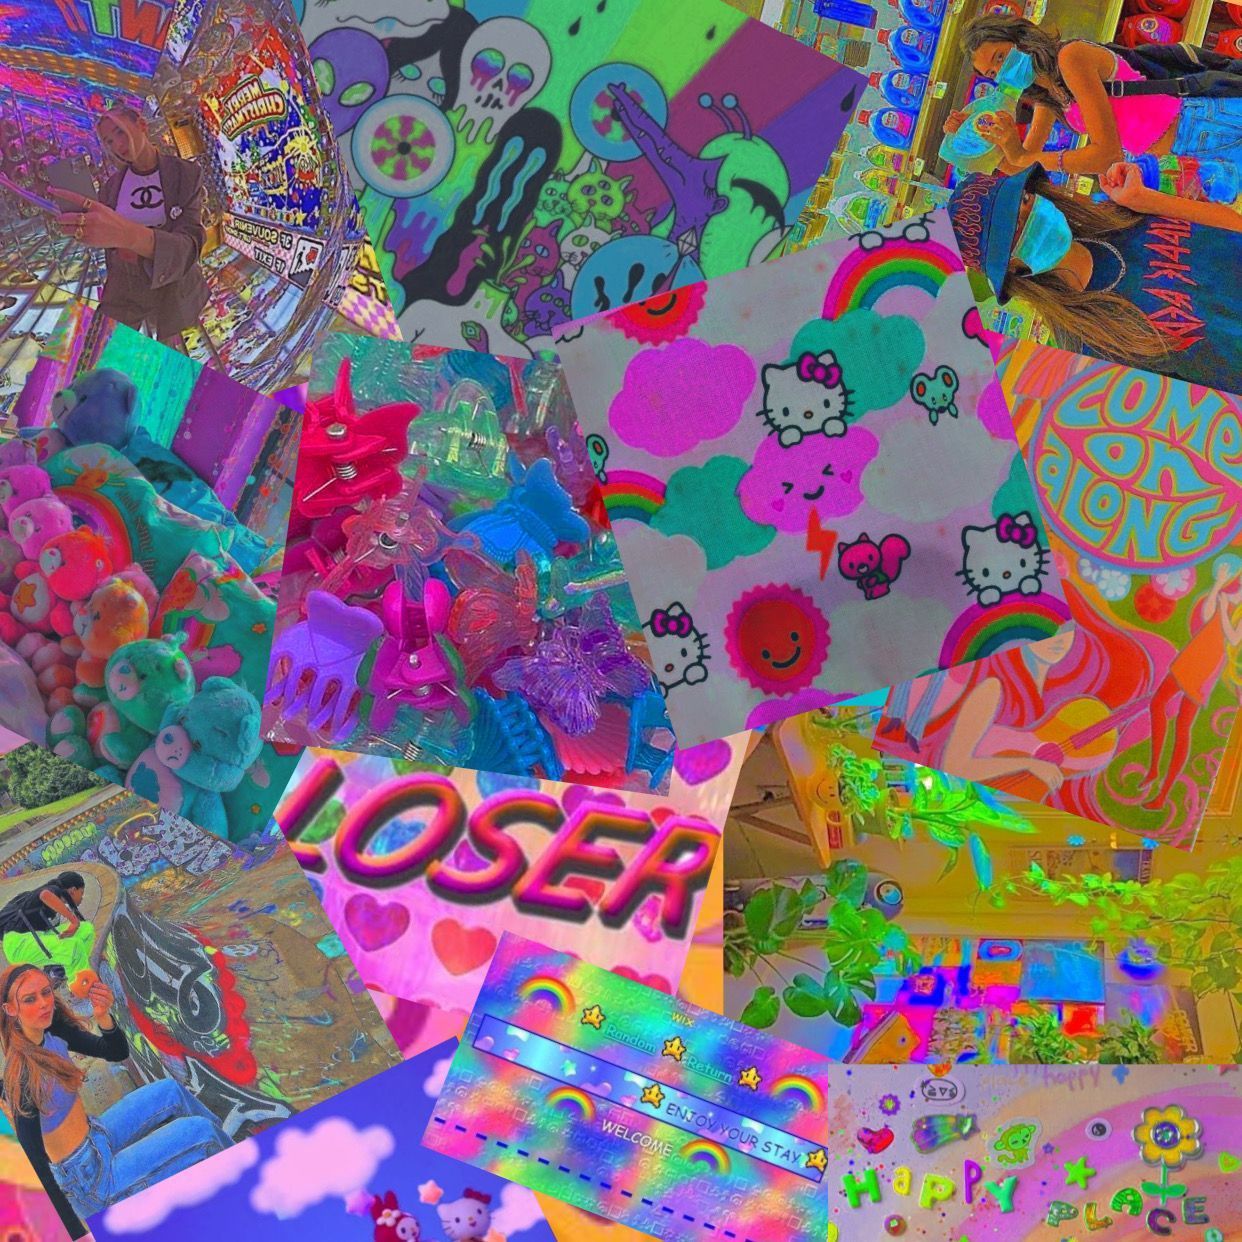 A colorful collage of images including a girl with a skateboard, a rainbow, and the word 